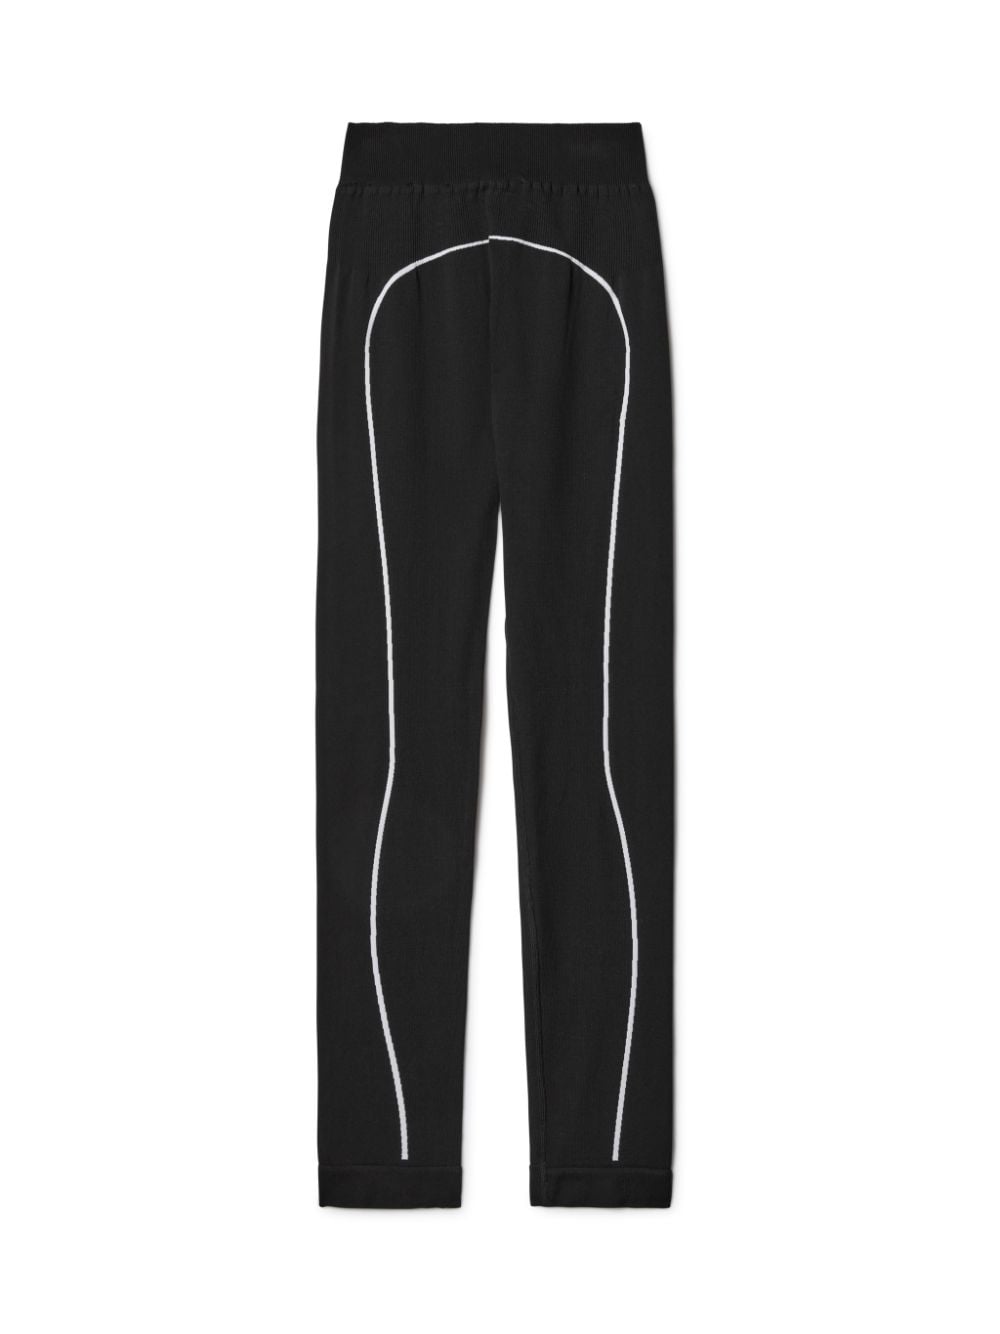 https://cdn-images.farfetch-contents.com/off-white-athl-off-stamp-seaml-leggings_17590638_42662482_1000.jpg